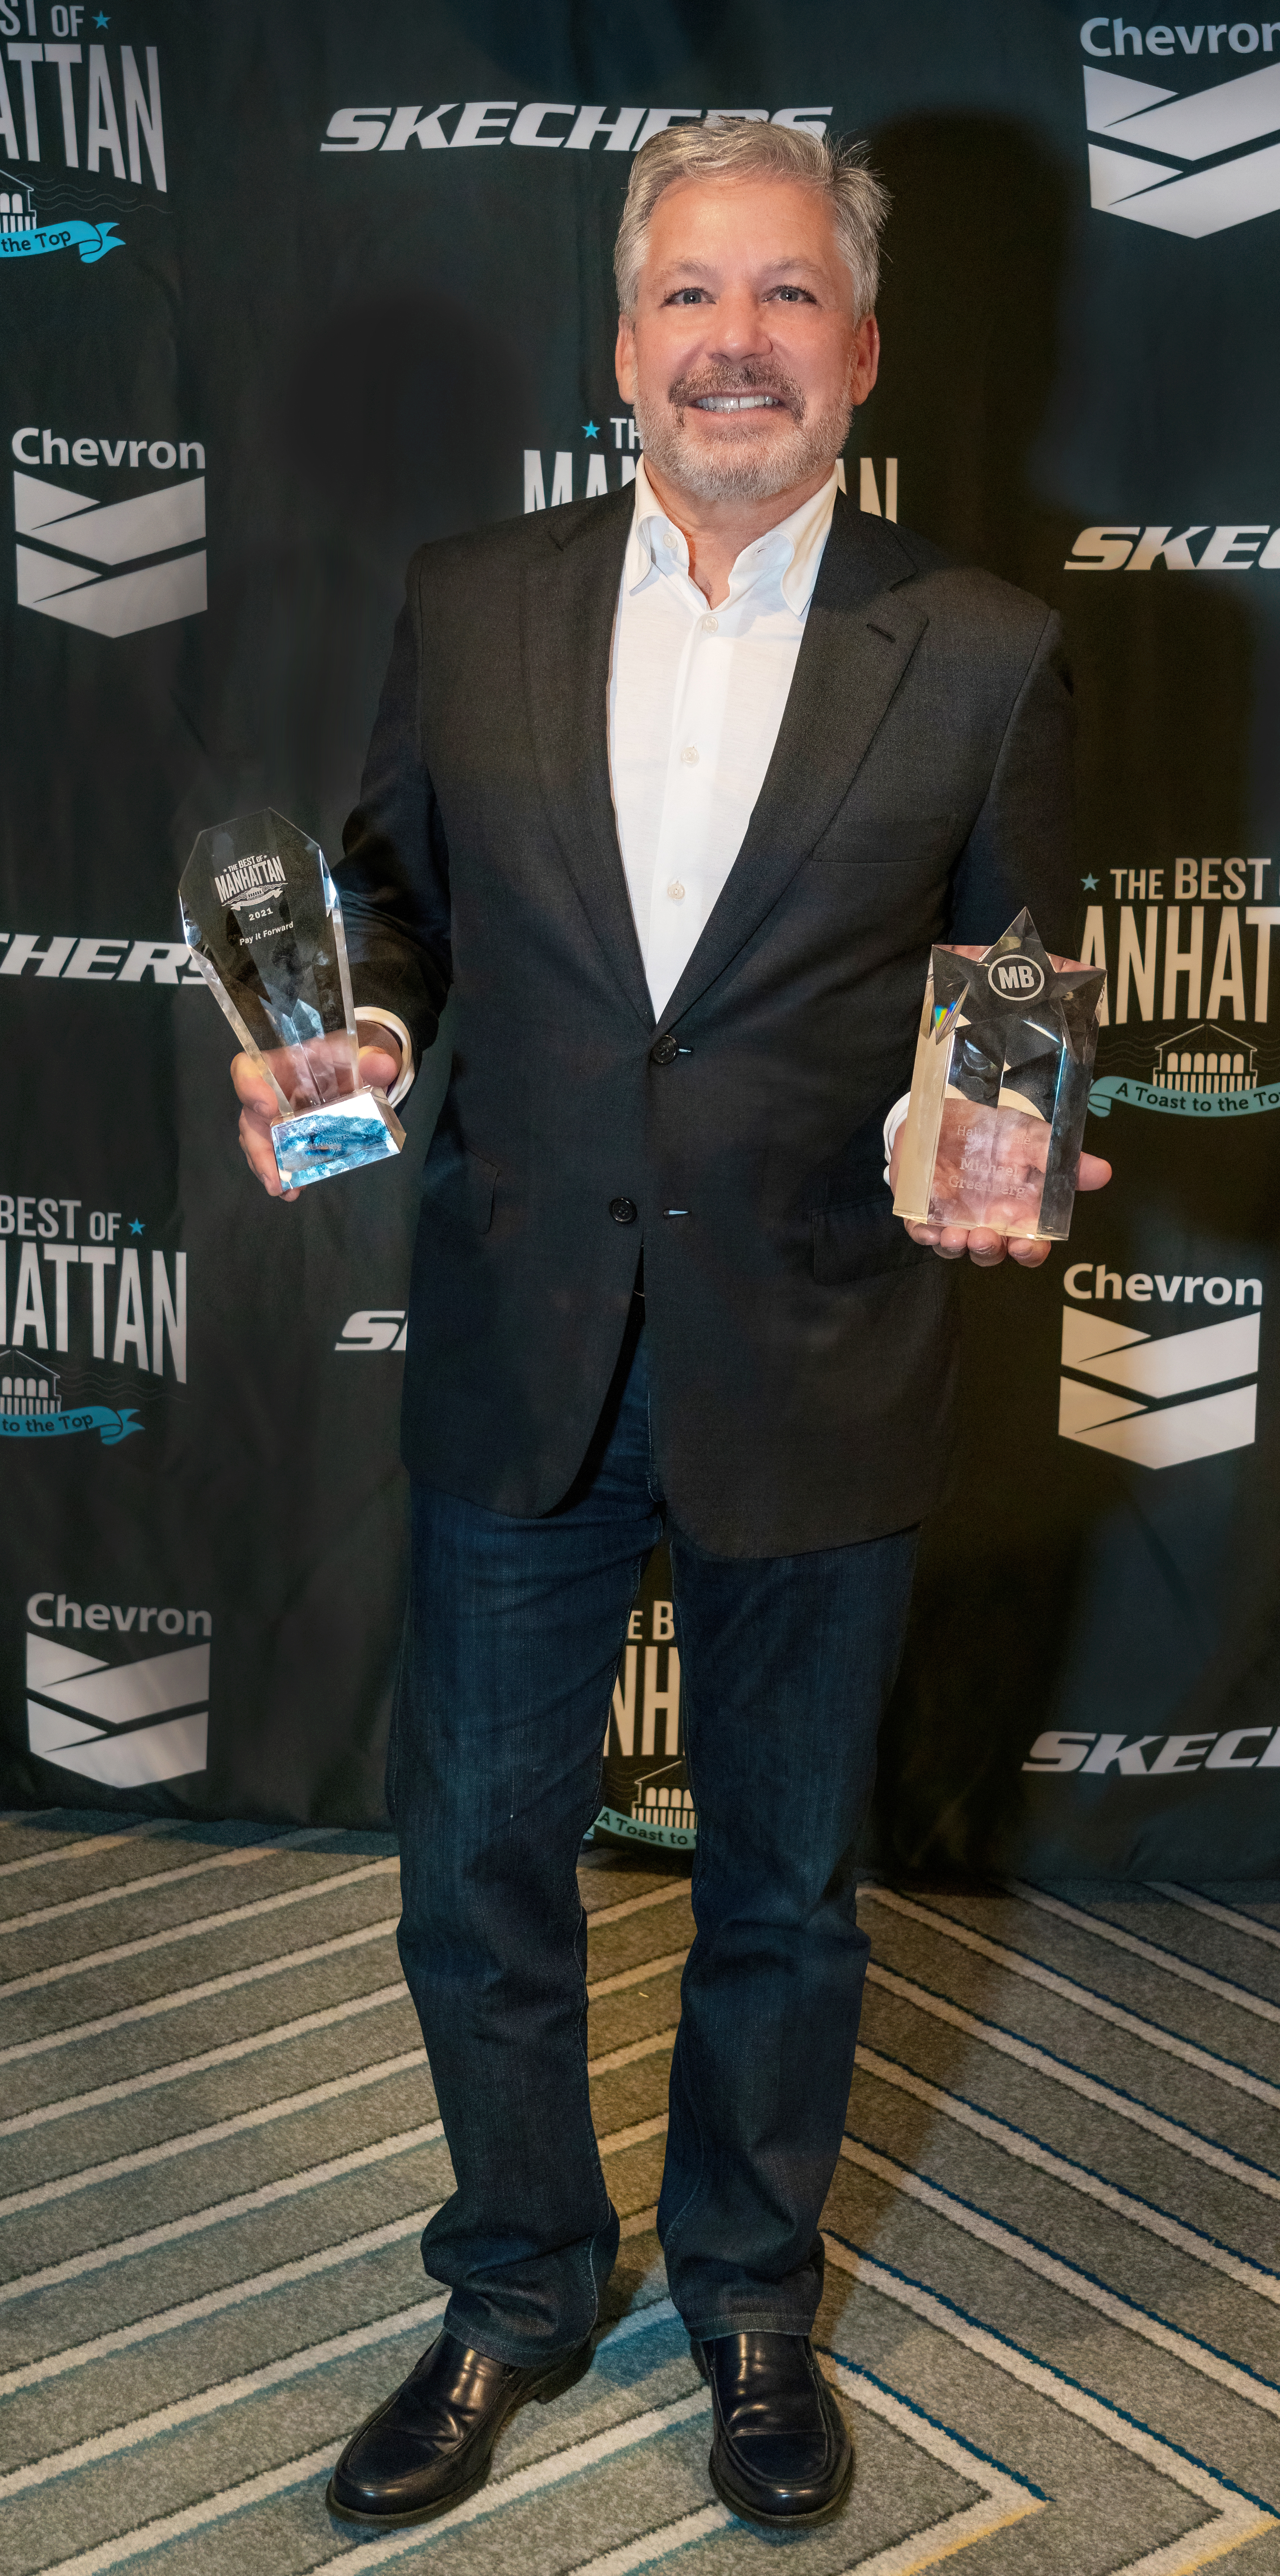 Empleador Enriquecer Alcanzar Skechers President Michael Greenberg Is Inducted Into Best of Manhattan's  Hall of Fame and Skechers Wins “Pay It Forward” Award | Business Wire